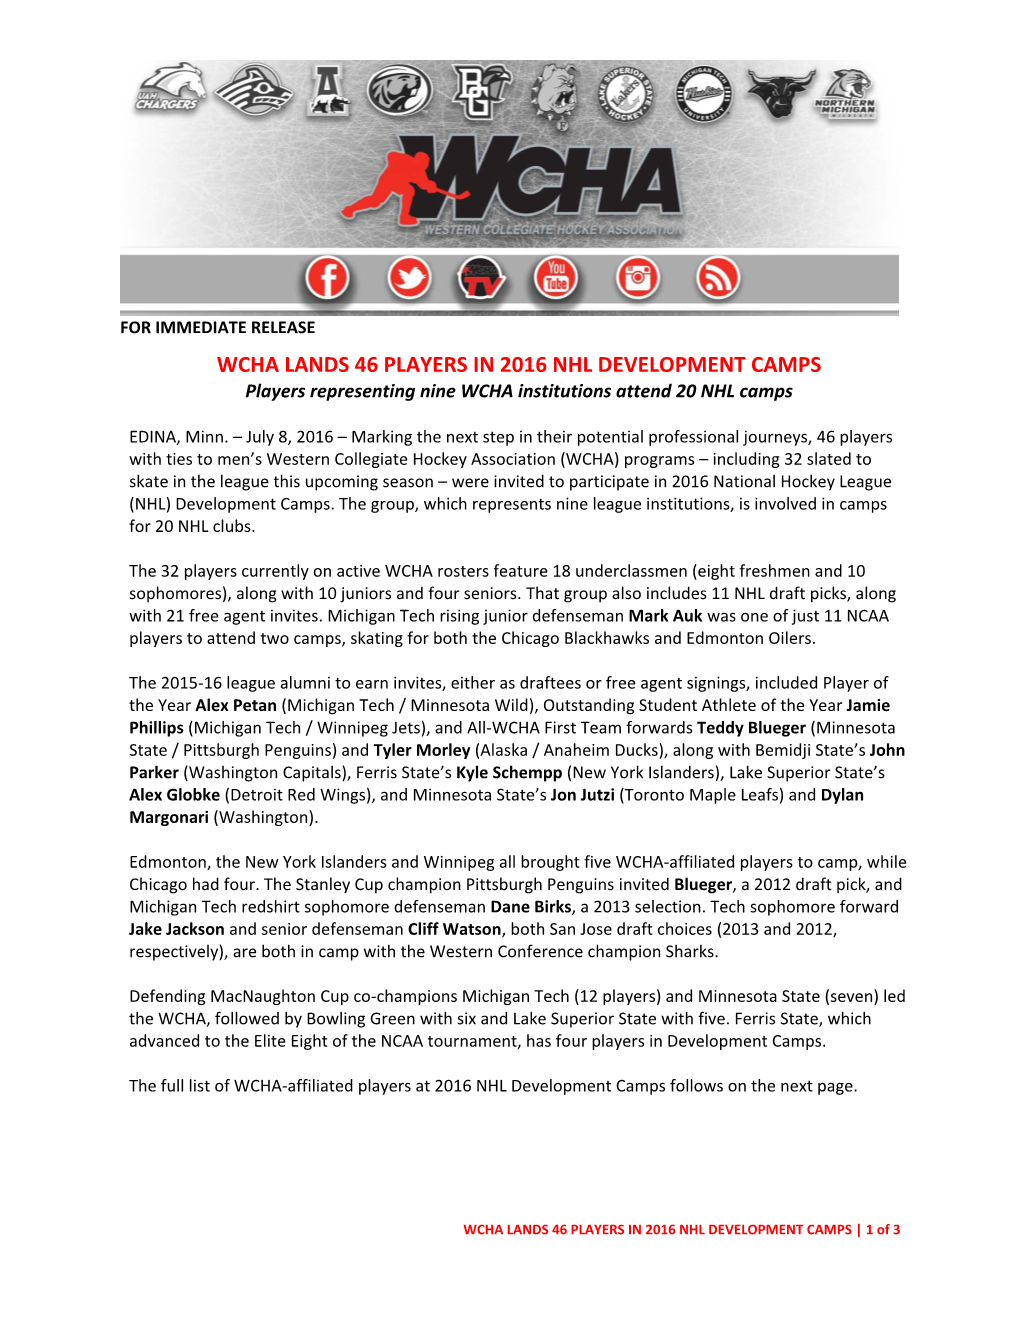 WCHA LANDS 46 PLAYERS in 2016 NHL DEVELOPMENT CAMPS Players Representing Nine WCHA Institutions Attend 20 NHL Camps